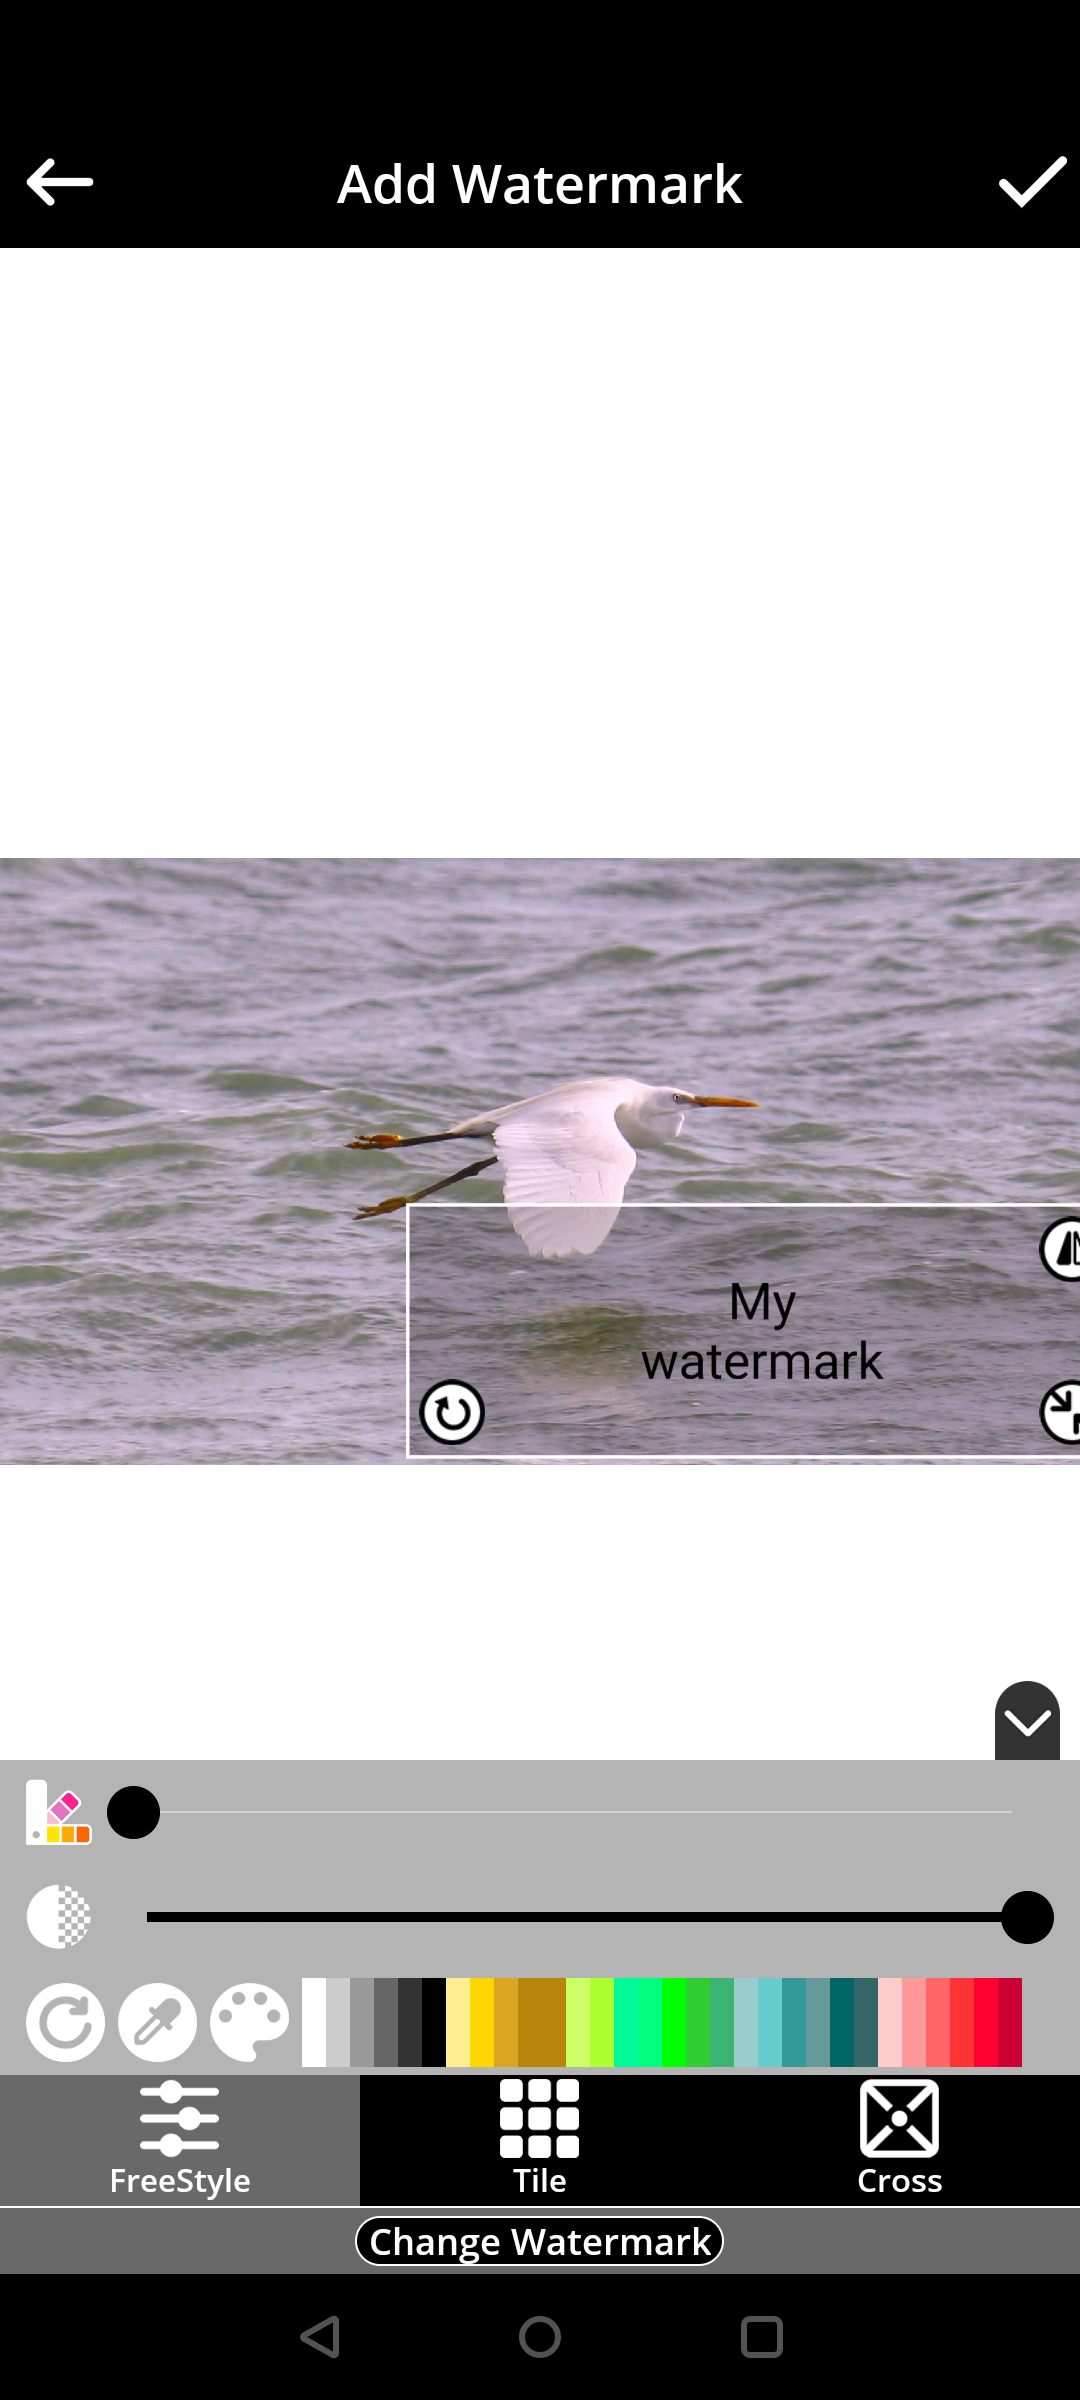 Add a watermark to your photos on Android